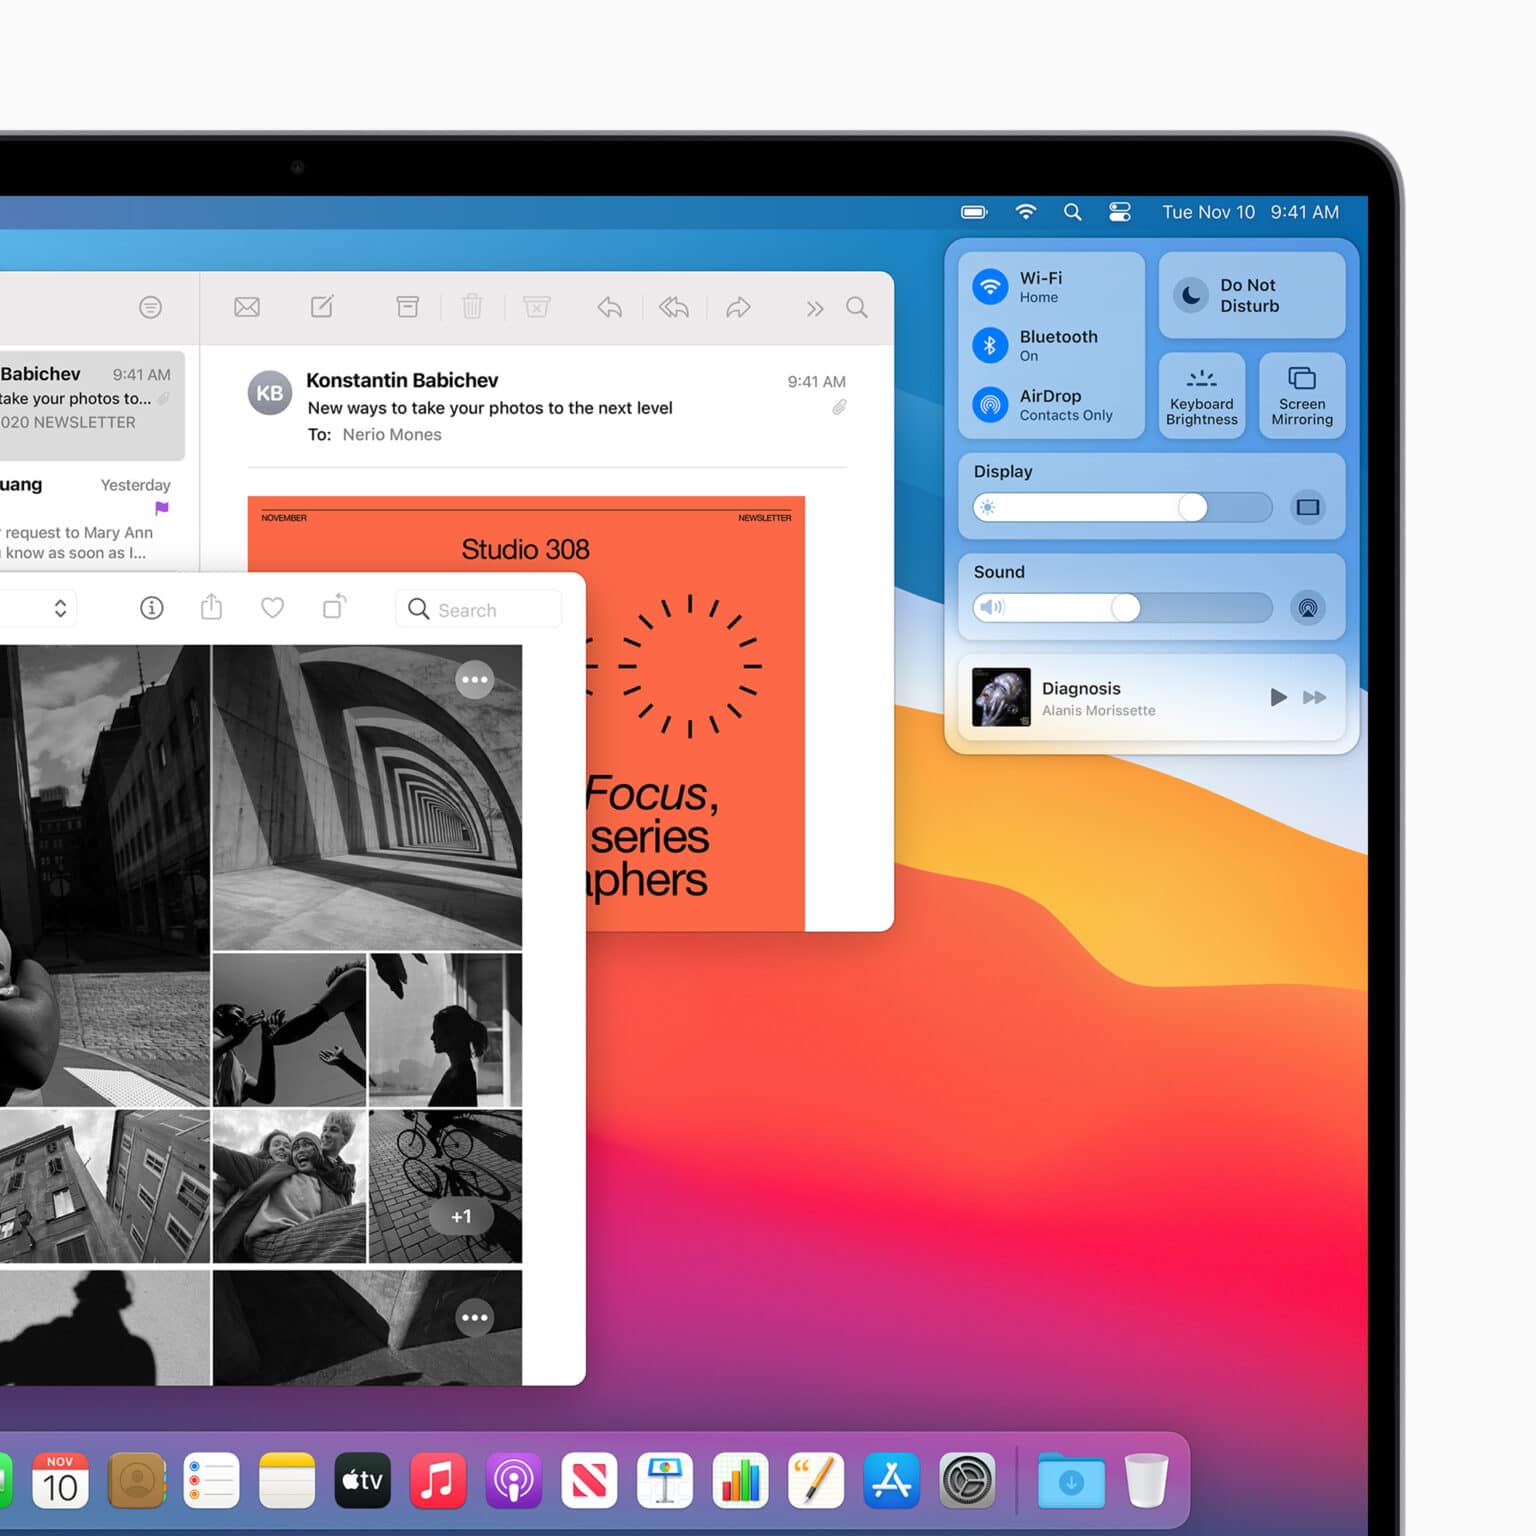 macOS Big Sur brings an iOS-style Control Center and other major changes to Mac.